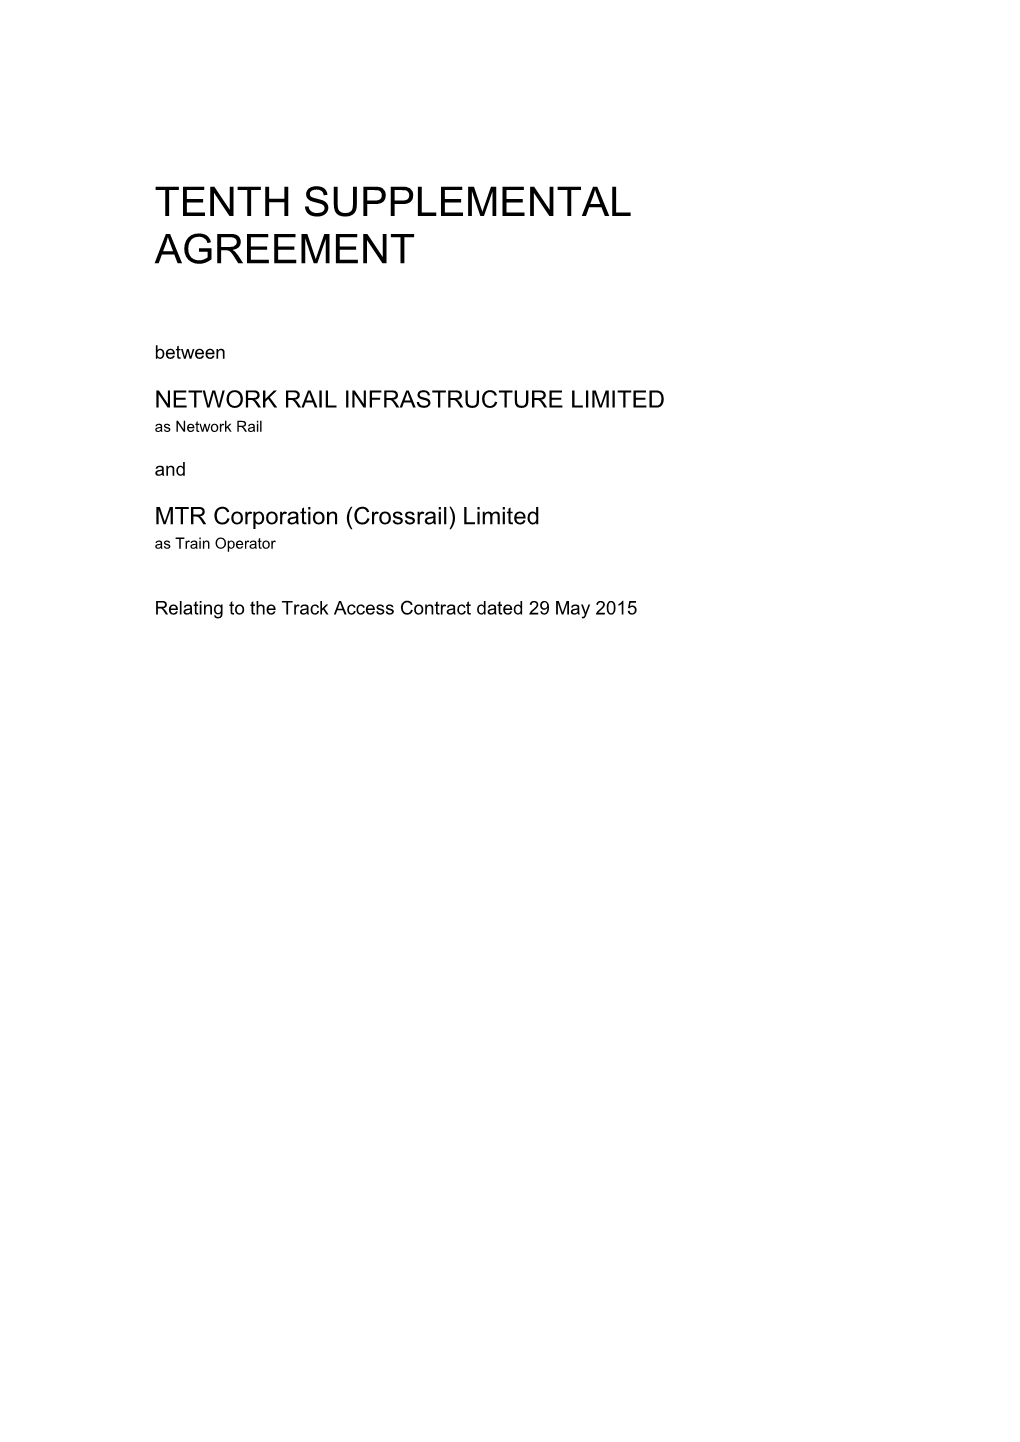 MTR Corporation Crossrail Limited 10Th Supplemental Agreement